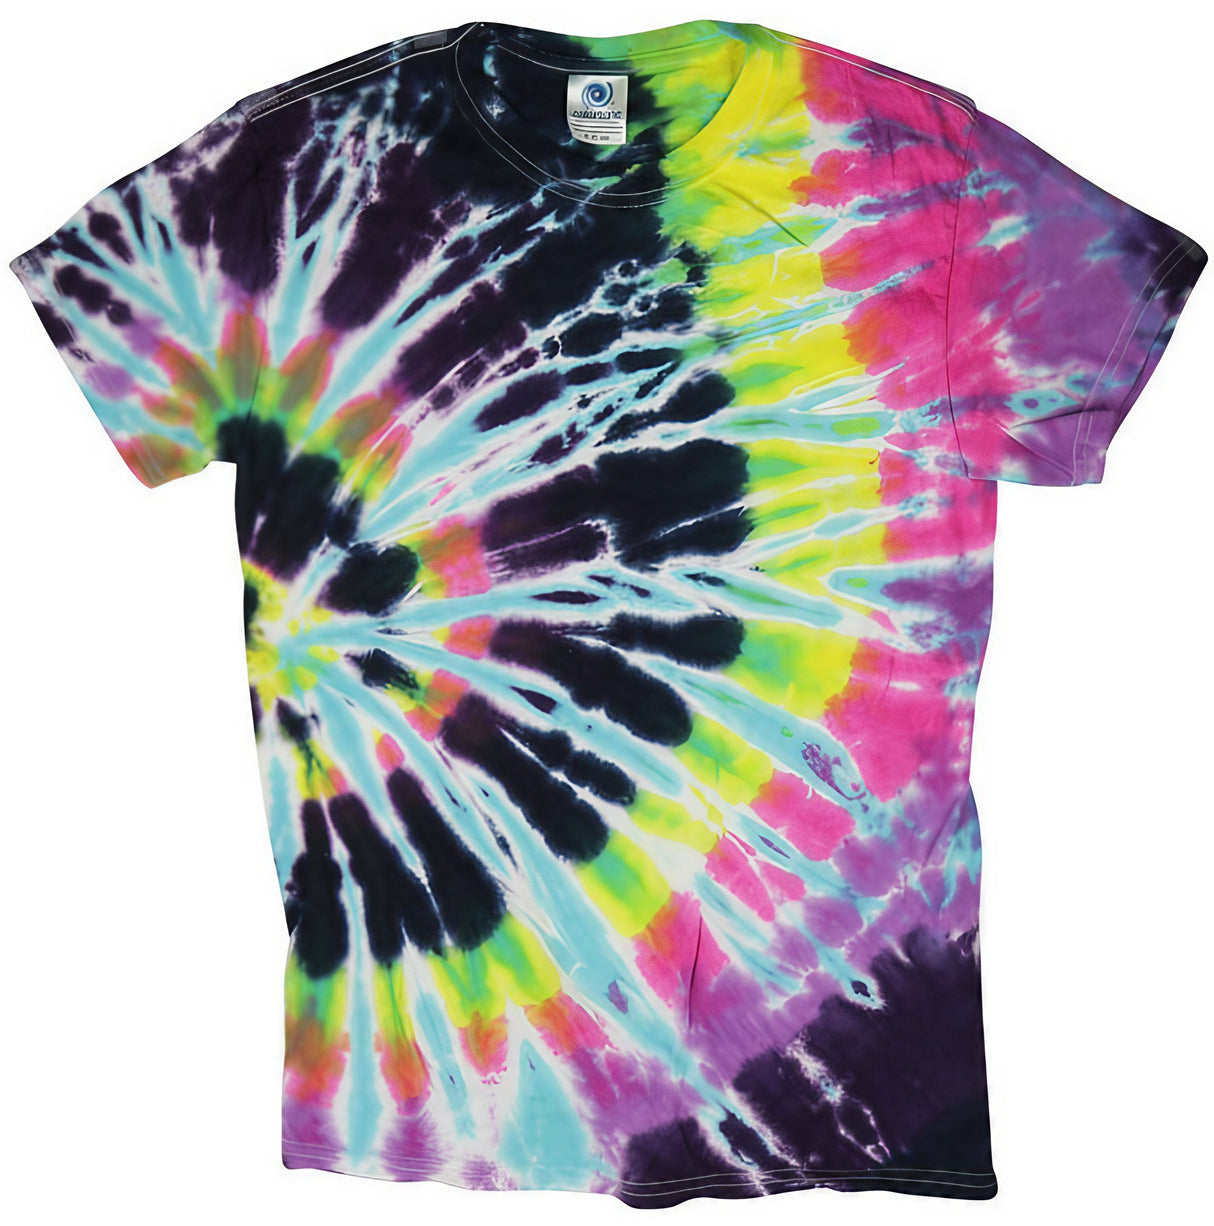 Colortone Flashback Tie-Dye T-Shirt with vibrant rainbow spiral pattern, front view on white background